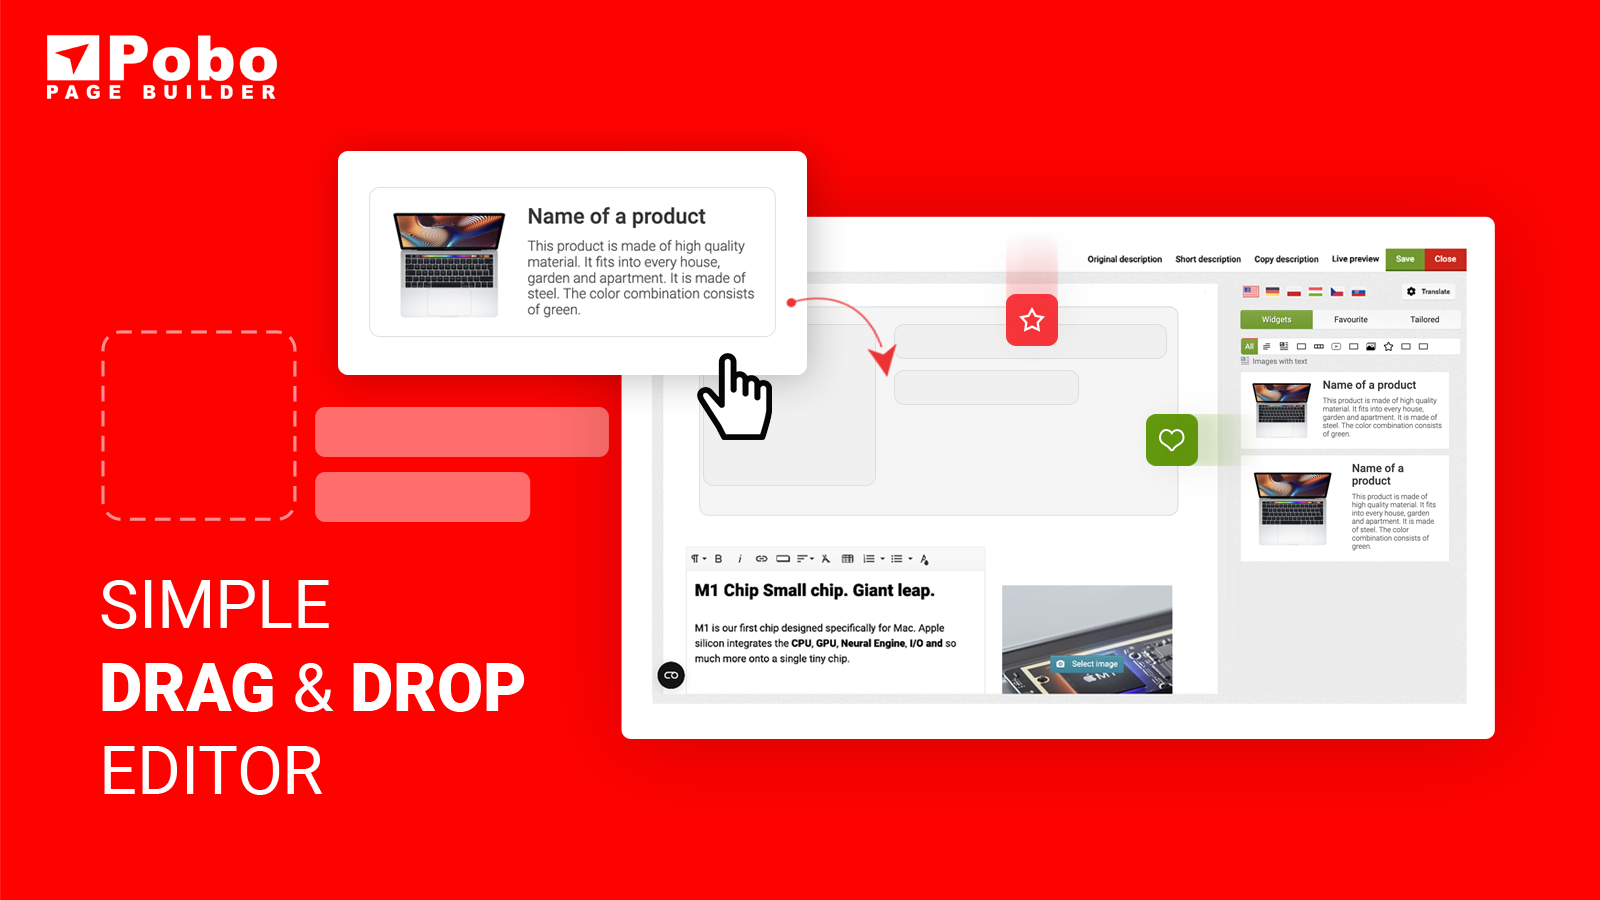 A simple drag & drop editor to create beautiful product pages.